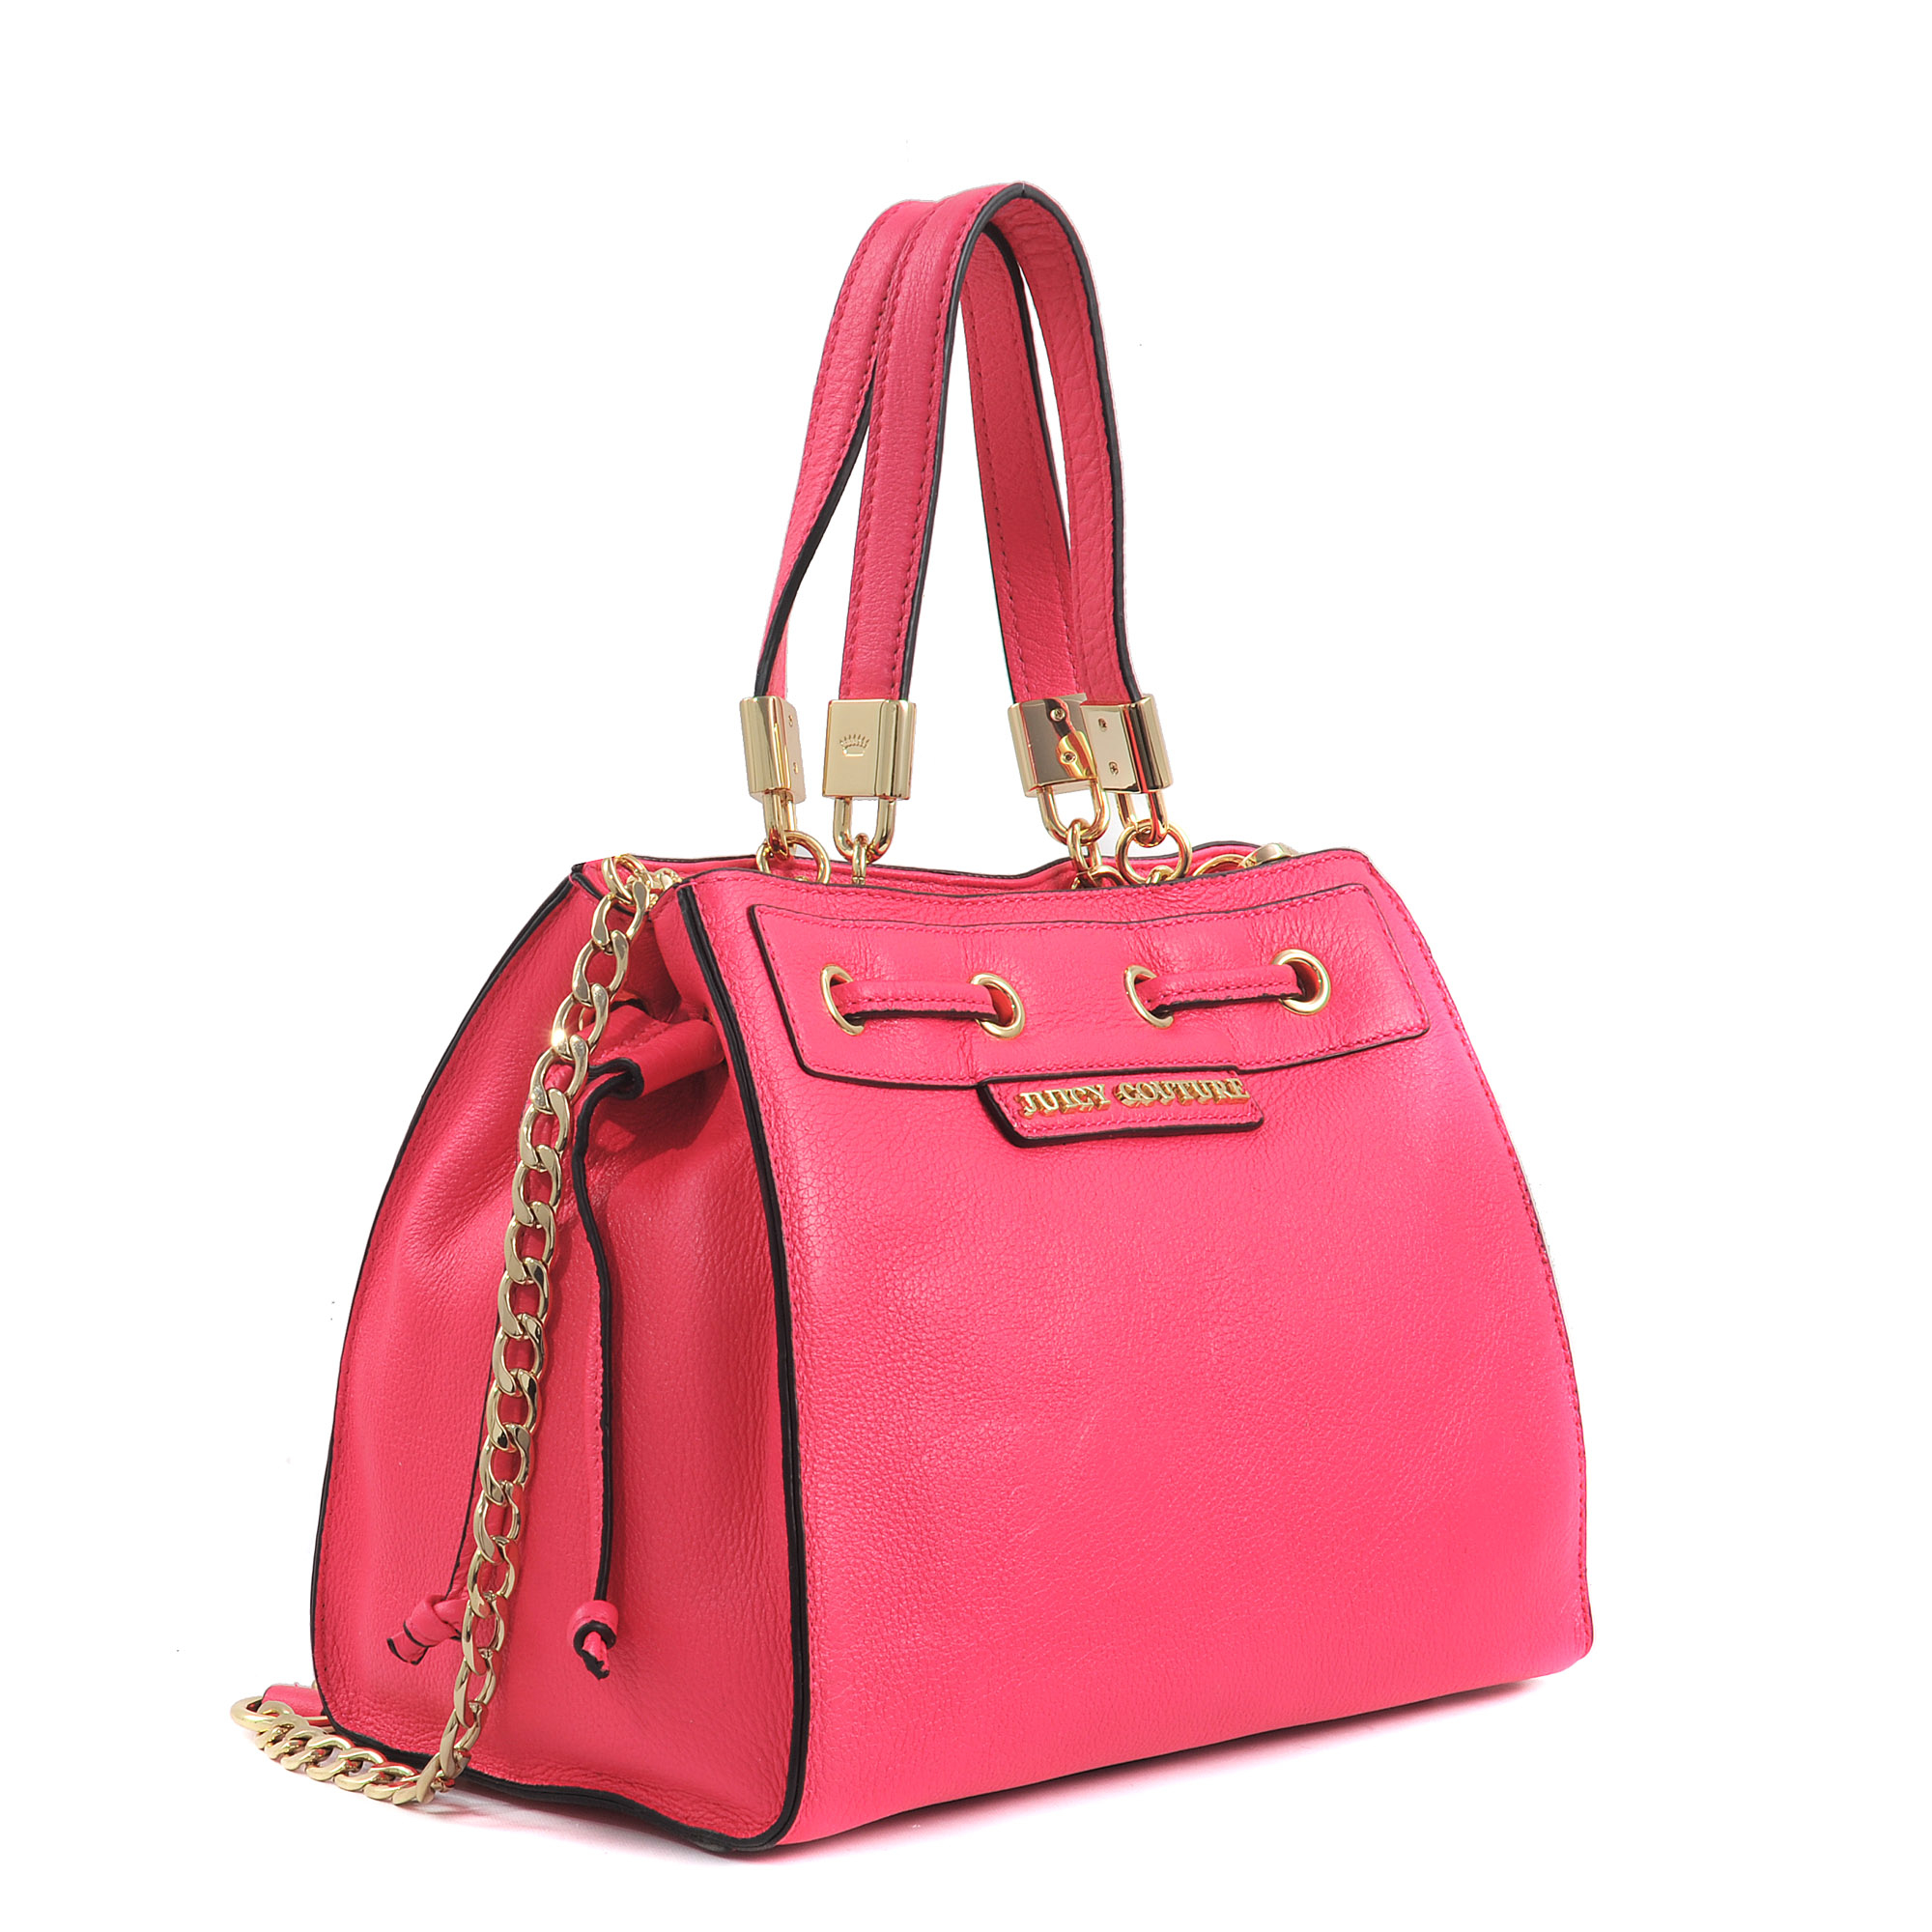 Juicy Couture Handbags Daydreamer Pink Panther | semashow.com